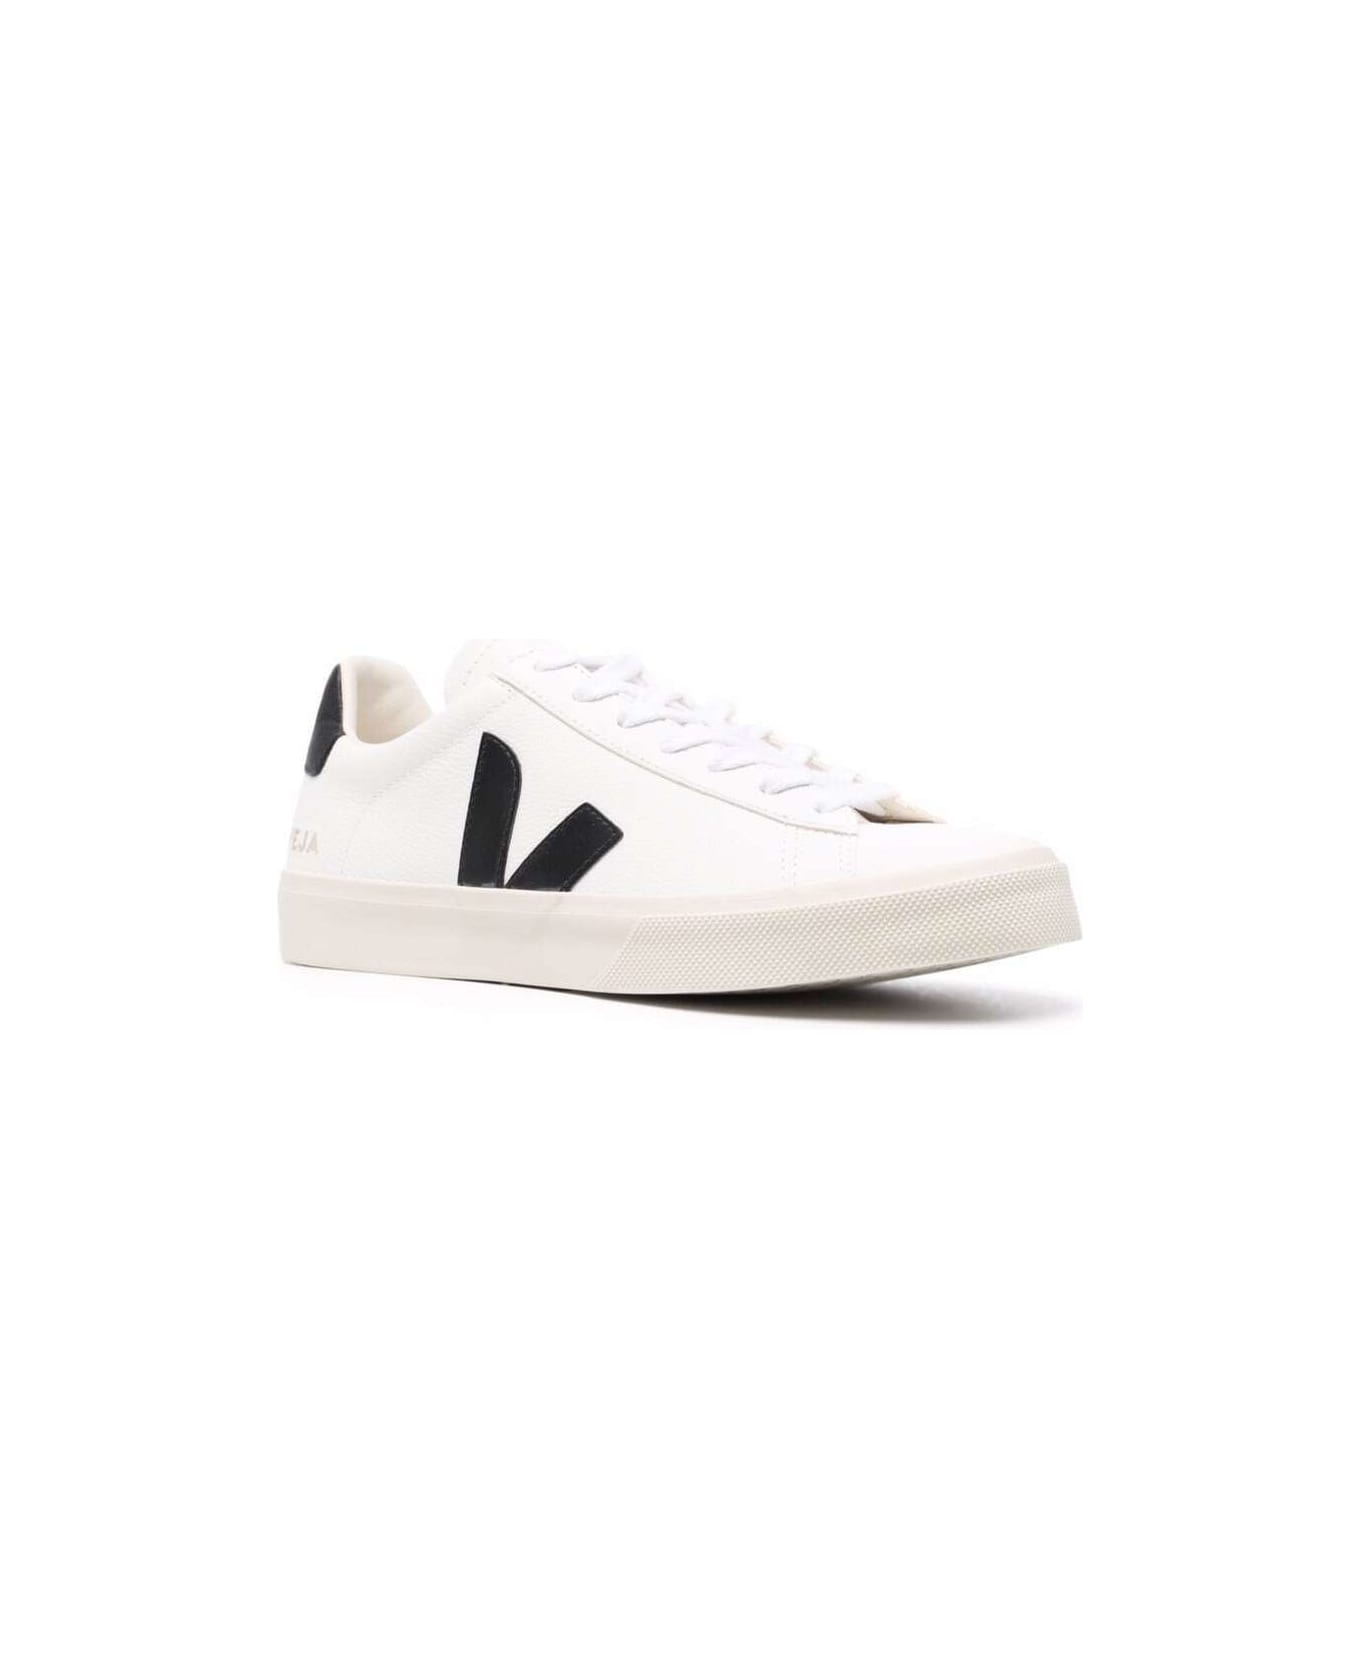 Veja 'campo' White And Black Low Top Sneakers In Vegan Leather Woman - White